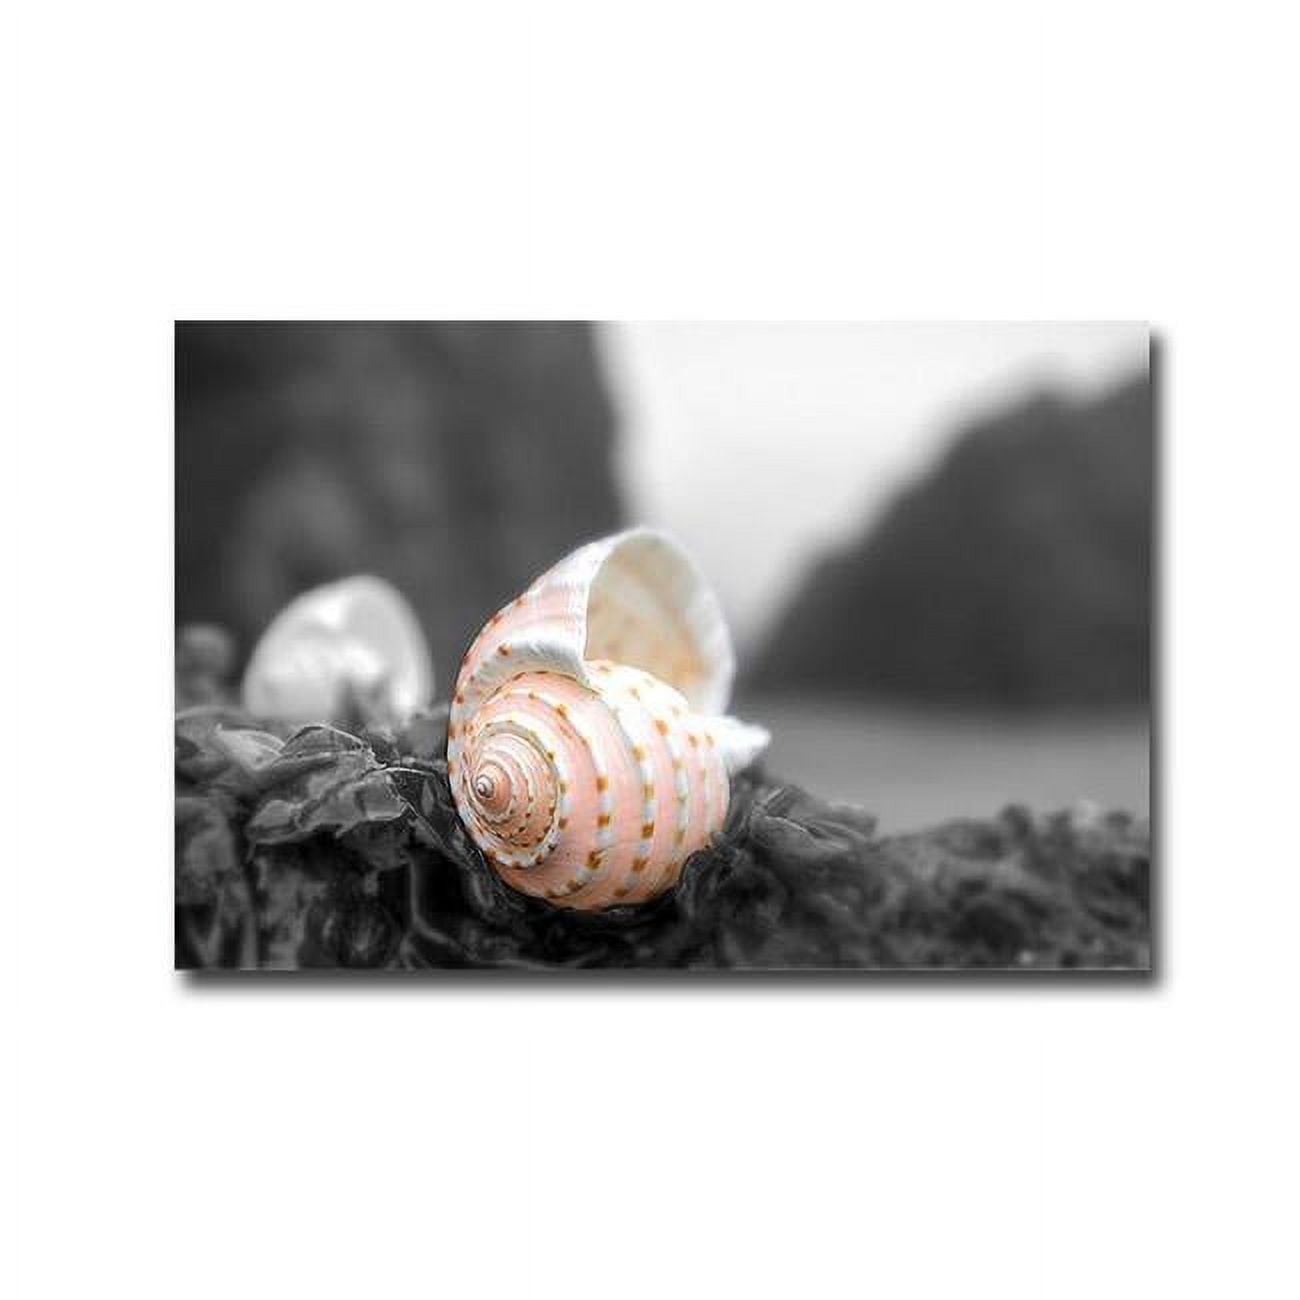 1218e868ig Crescent Beach Shells No.1a By Alan Blaustein Premium Gallery-wrapped Canvas Giclee Art - 12 X 18 X 1.5 In.